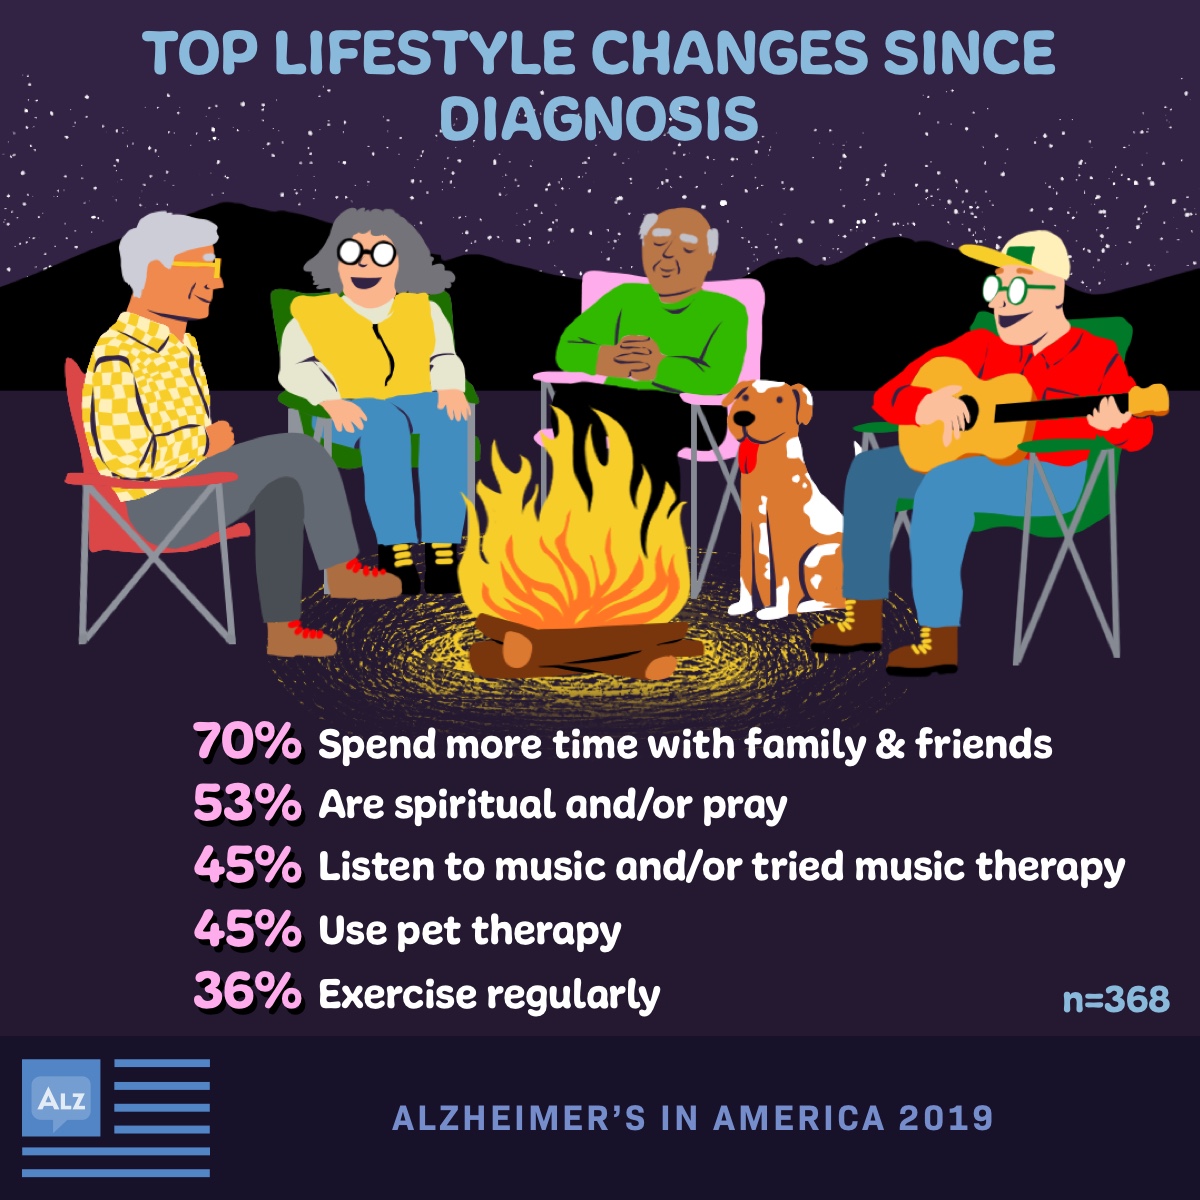 Top lifestyle changes for Alzheimer’s patients since diagnosis, including spending more time with family & friends, and becoming spiritual.